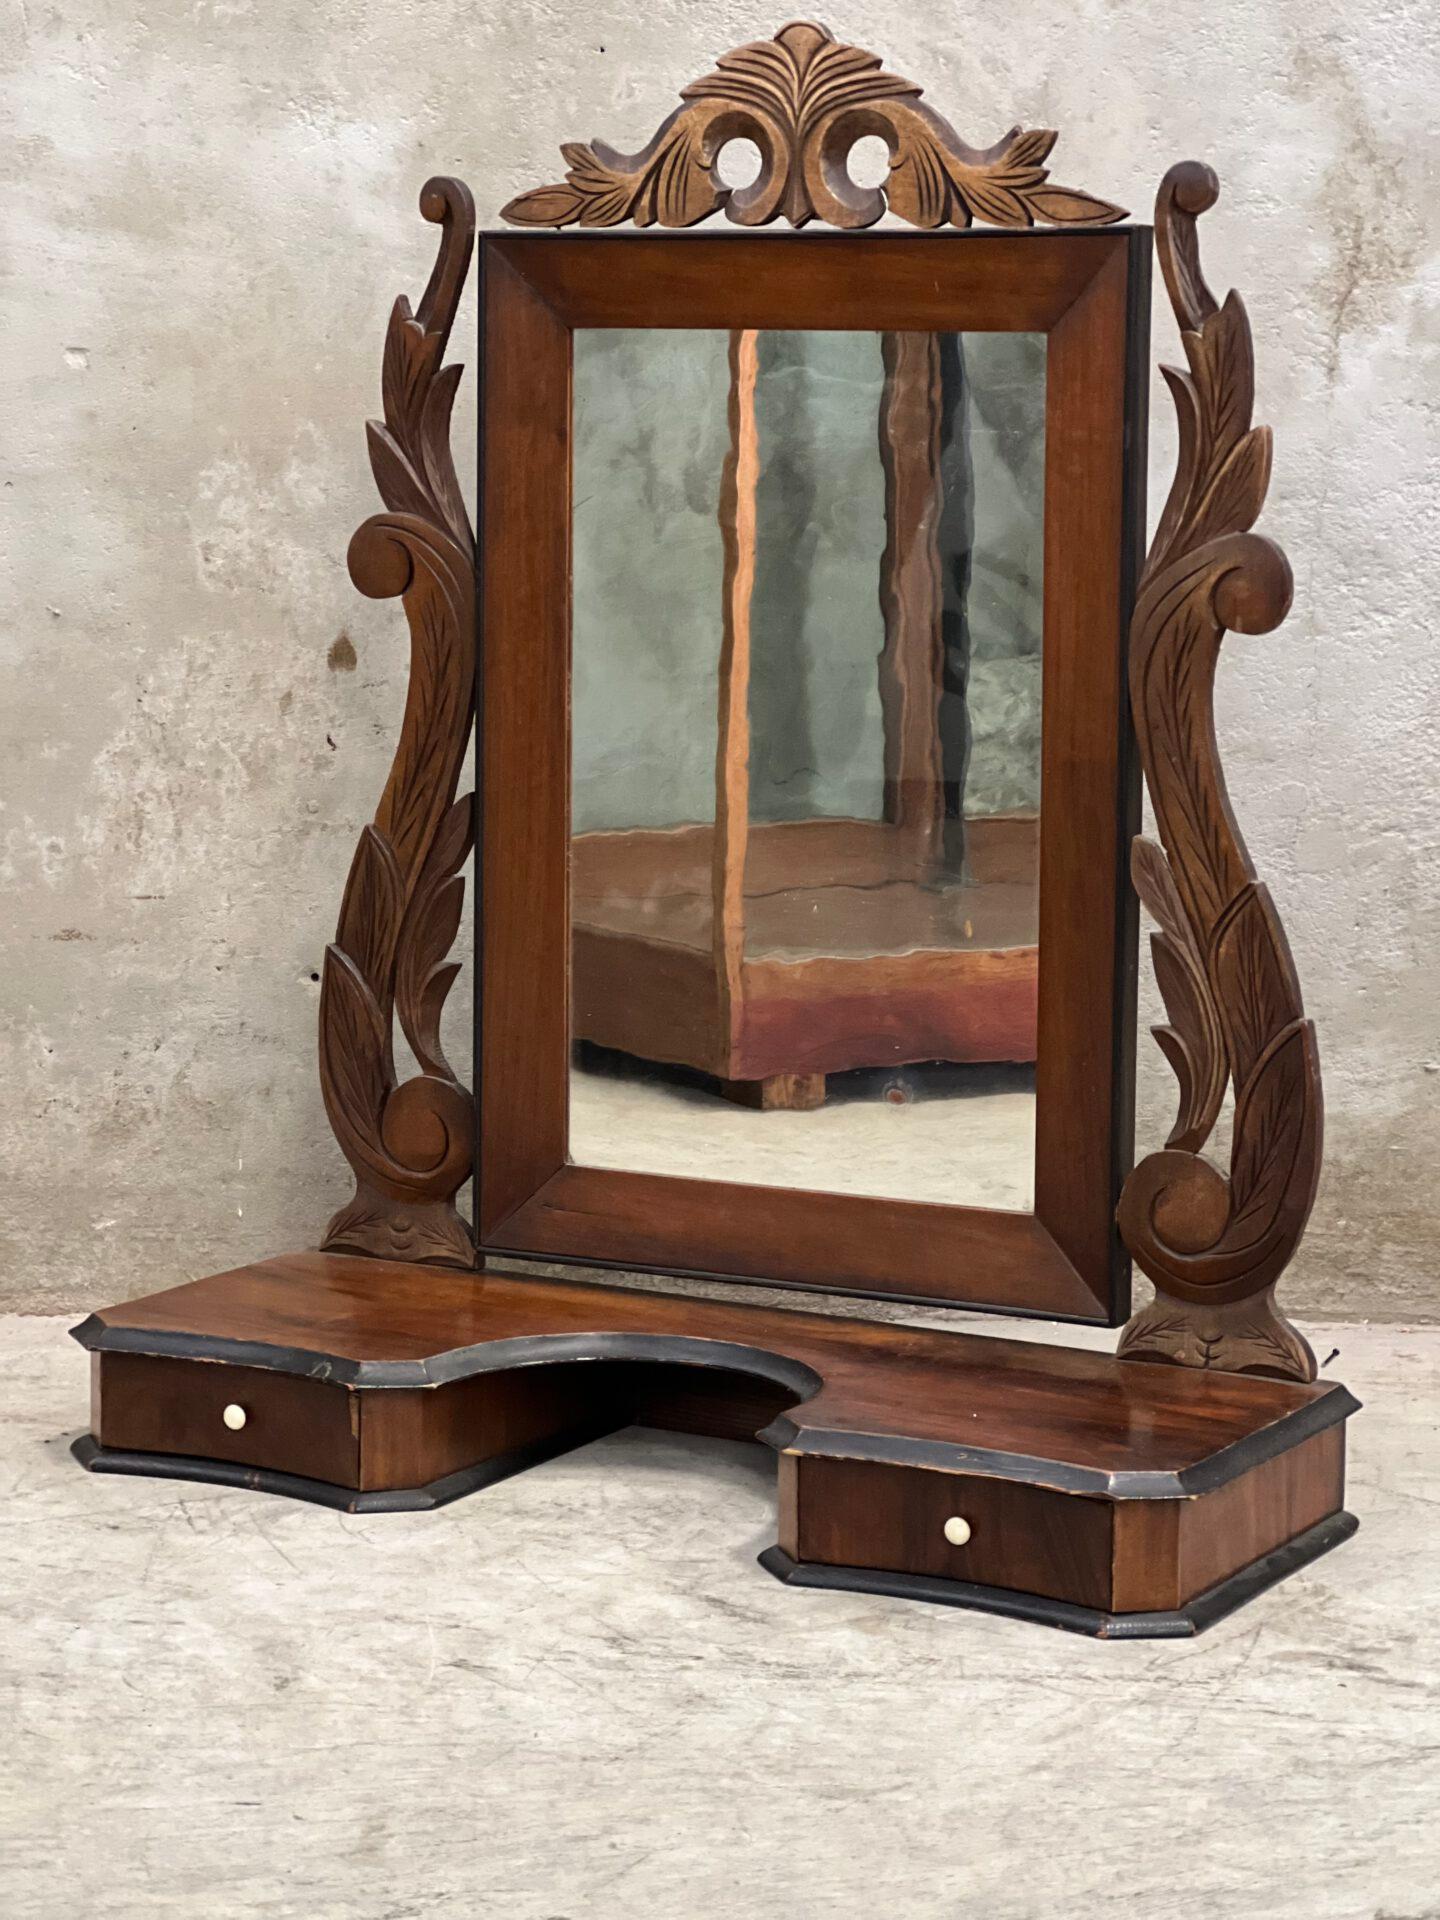 Beautiful antique dressing mirror, table top with 2 small drawers. Approx. 1880-1900 and presumably English. Rosewood veneer and mahogany frame. The mirror is beautifully lived and it is a silver mirror and shows a kind of relief, just like with old